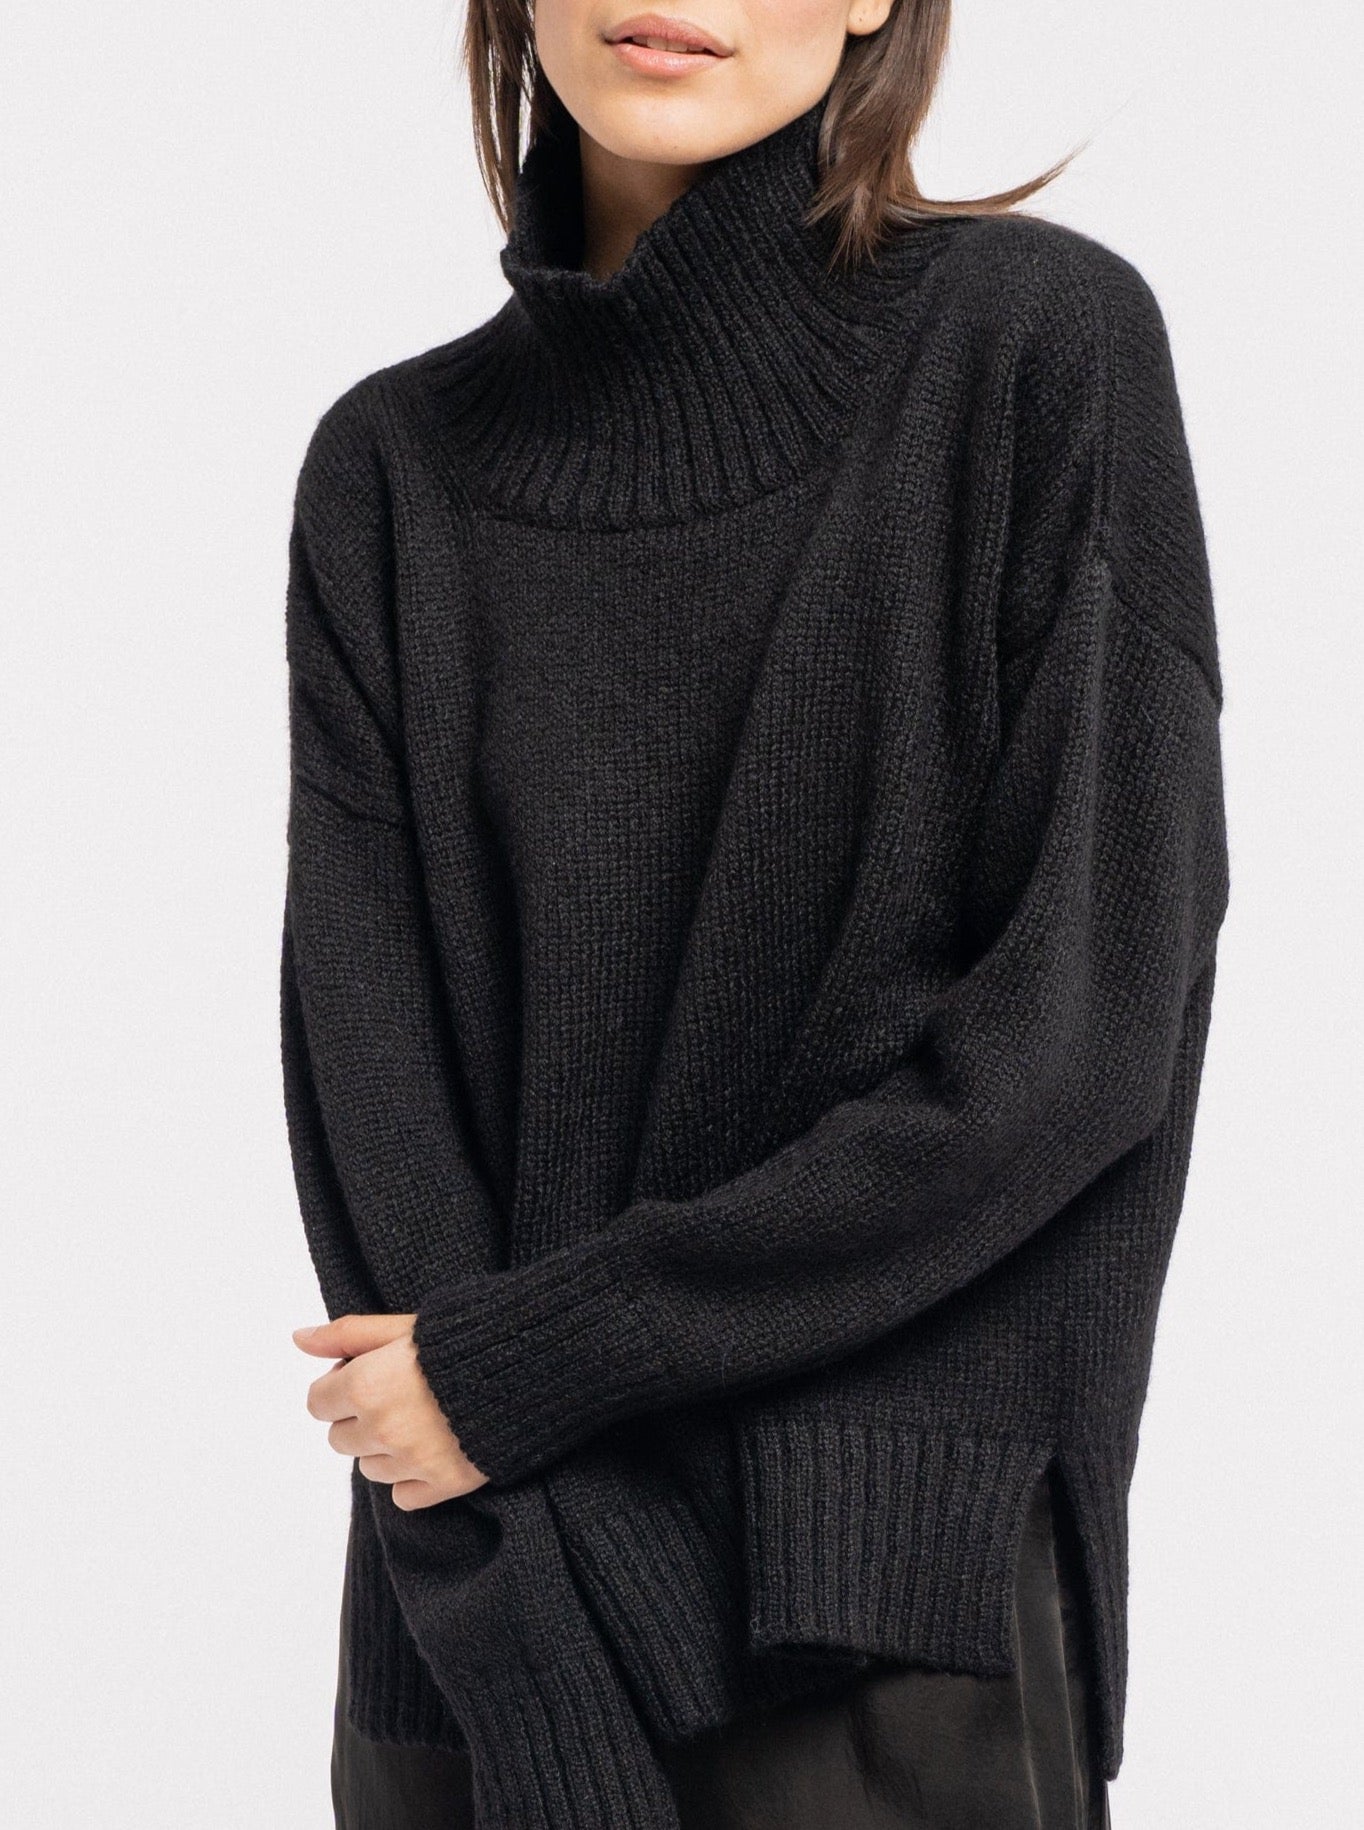 A woman in a Totto Sweater - Black - pre-order.